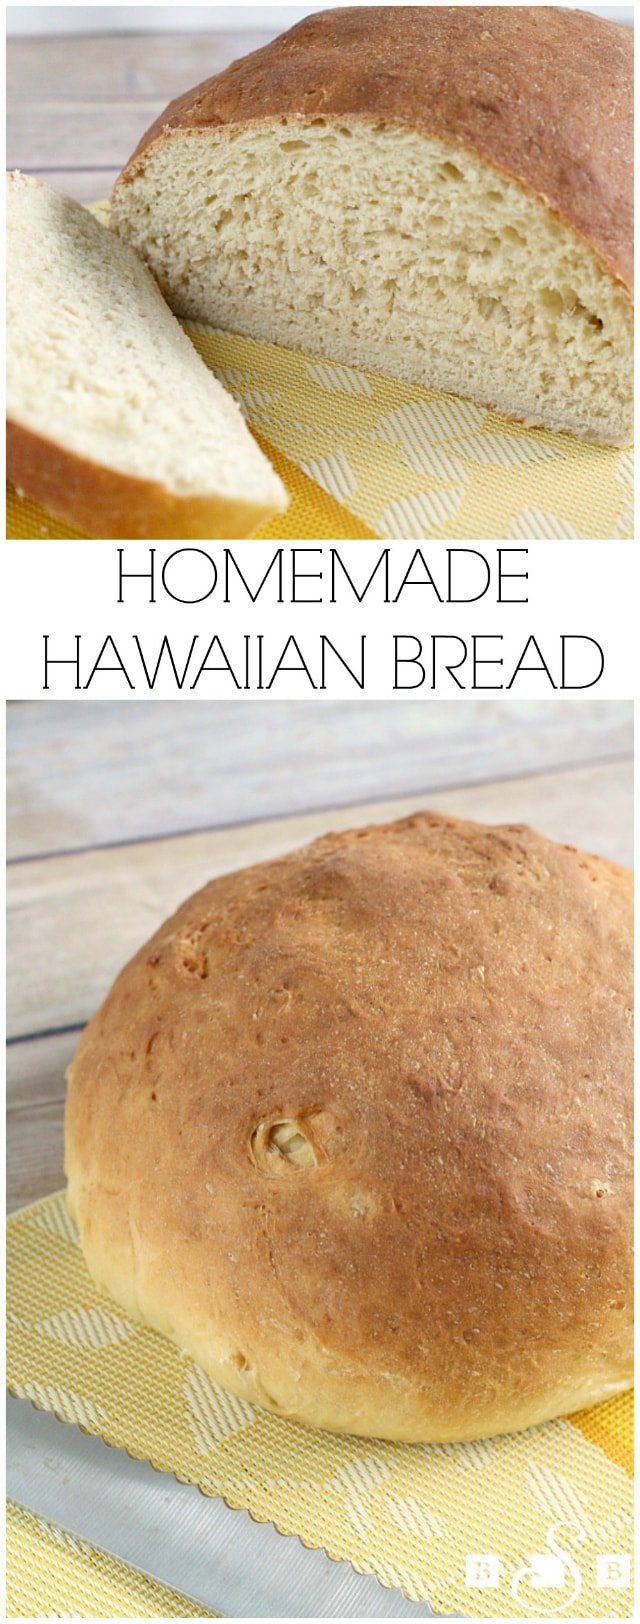 Hawaiian Bread made fresh with butter, eggs, flour, pineapple juice, ginger and vanilla. Simple, flavorful #Hawaiian #Bread recipe you can enjoy at home!